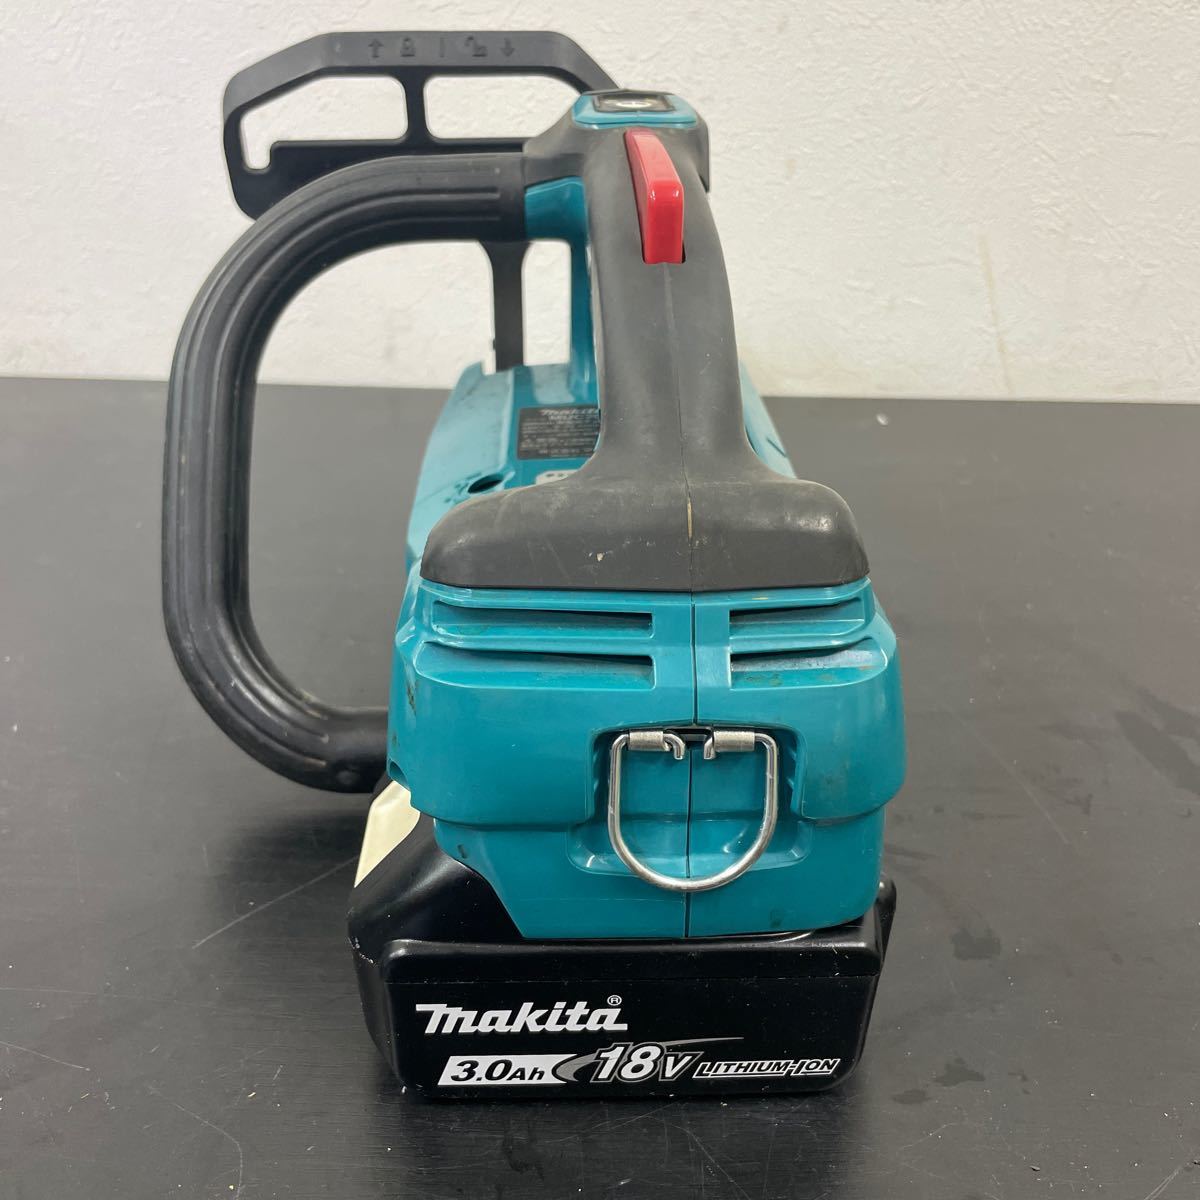 d☆●62 makita 充電式チェーンソーMUC204D 18Vバッテリー 付き 電動工具 大工道具 切断機 工具箱付き　取扱説明書付き 替刃付き　マキタ _画像5